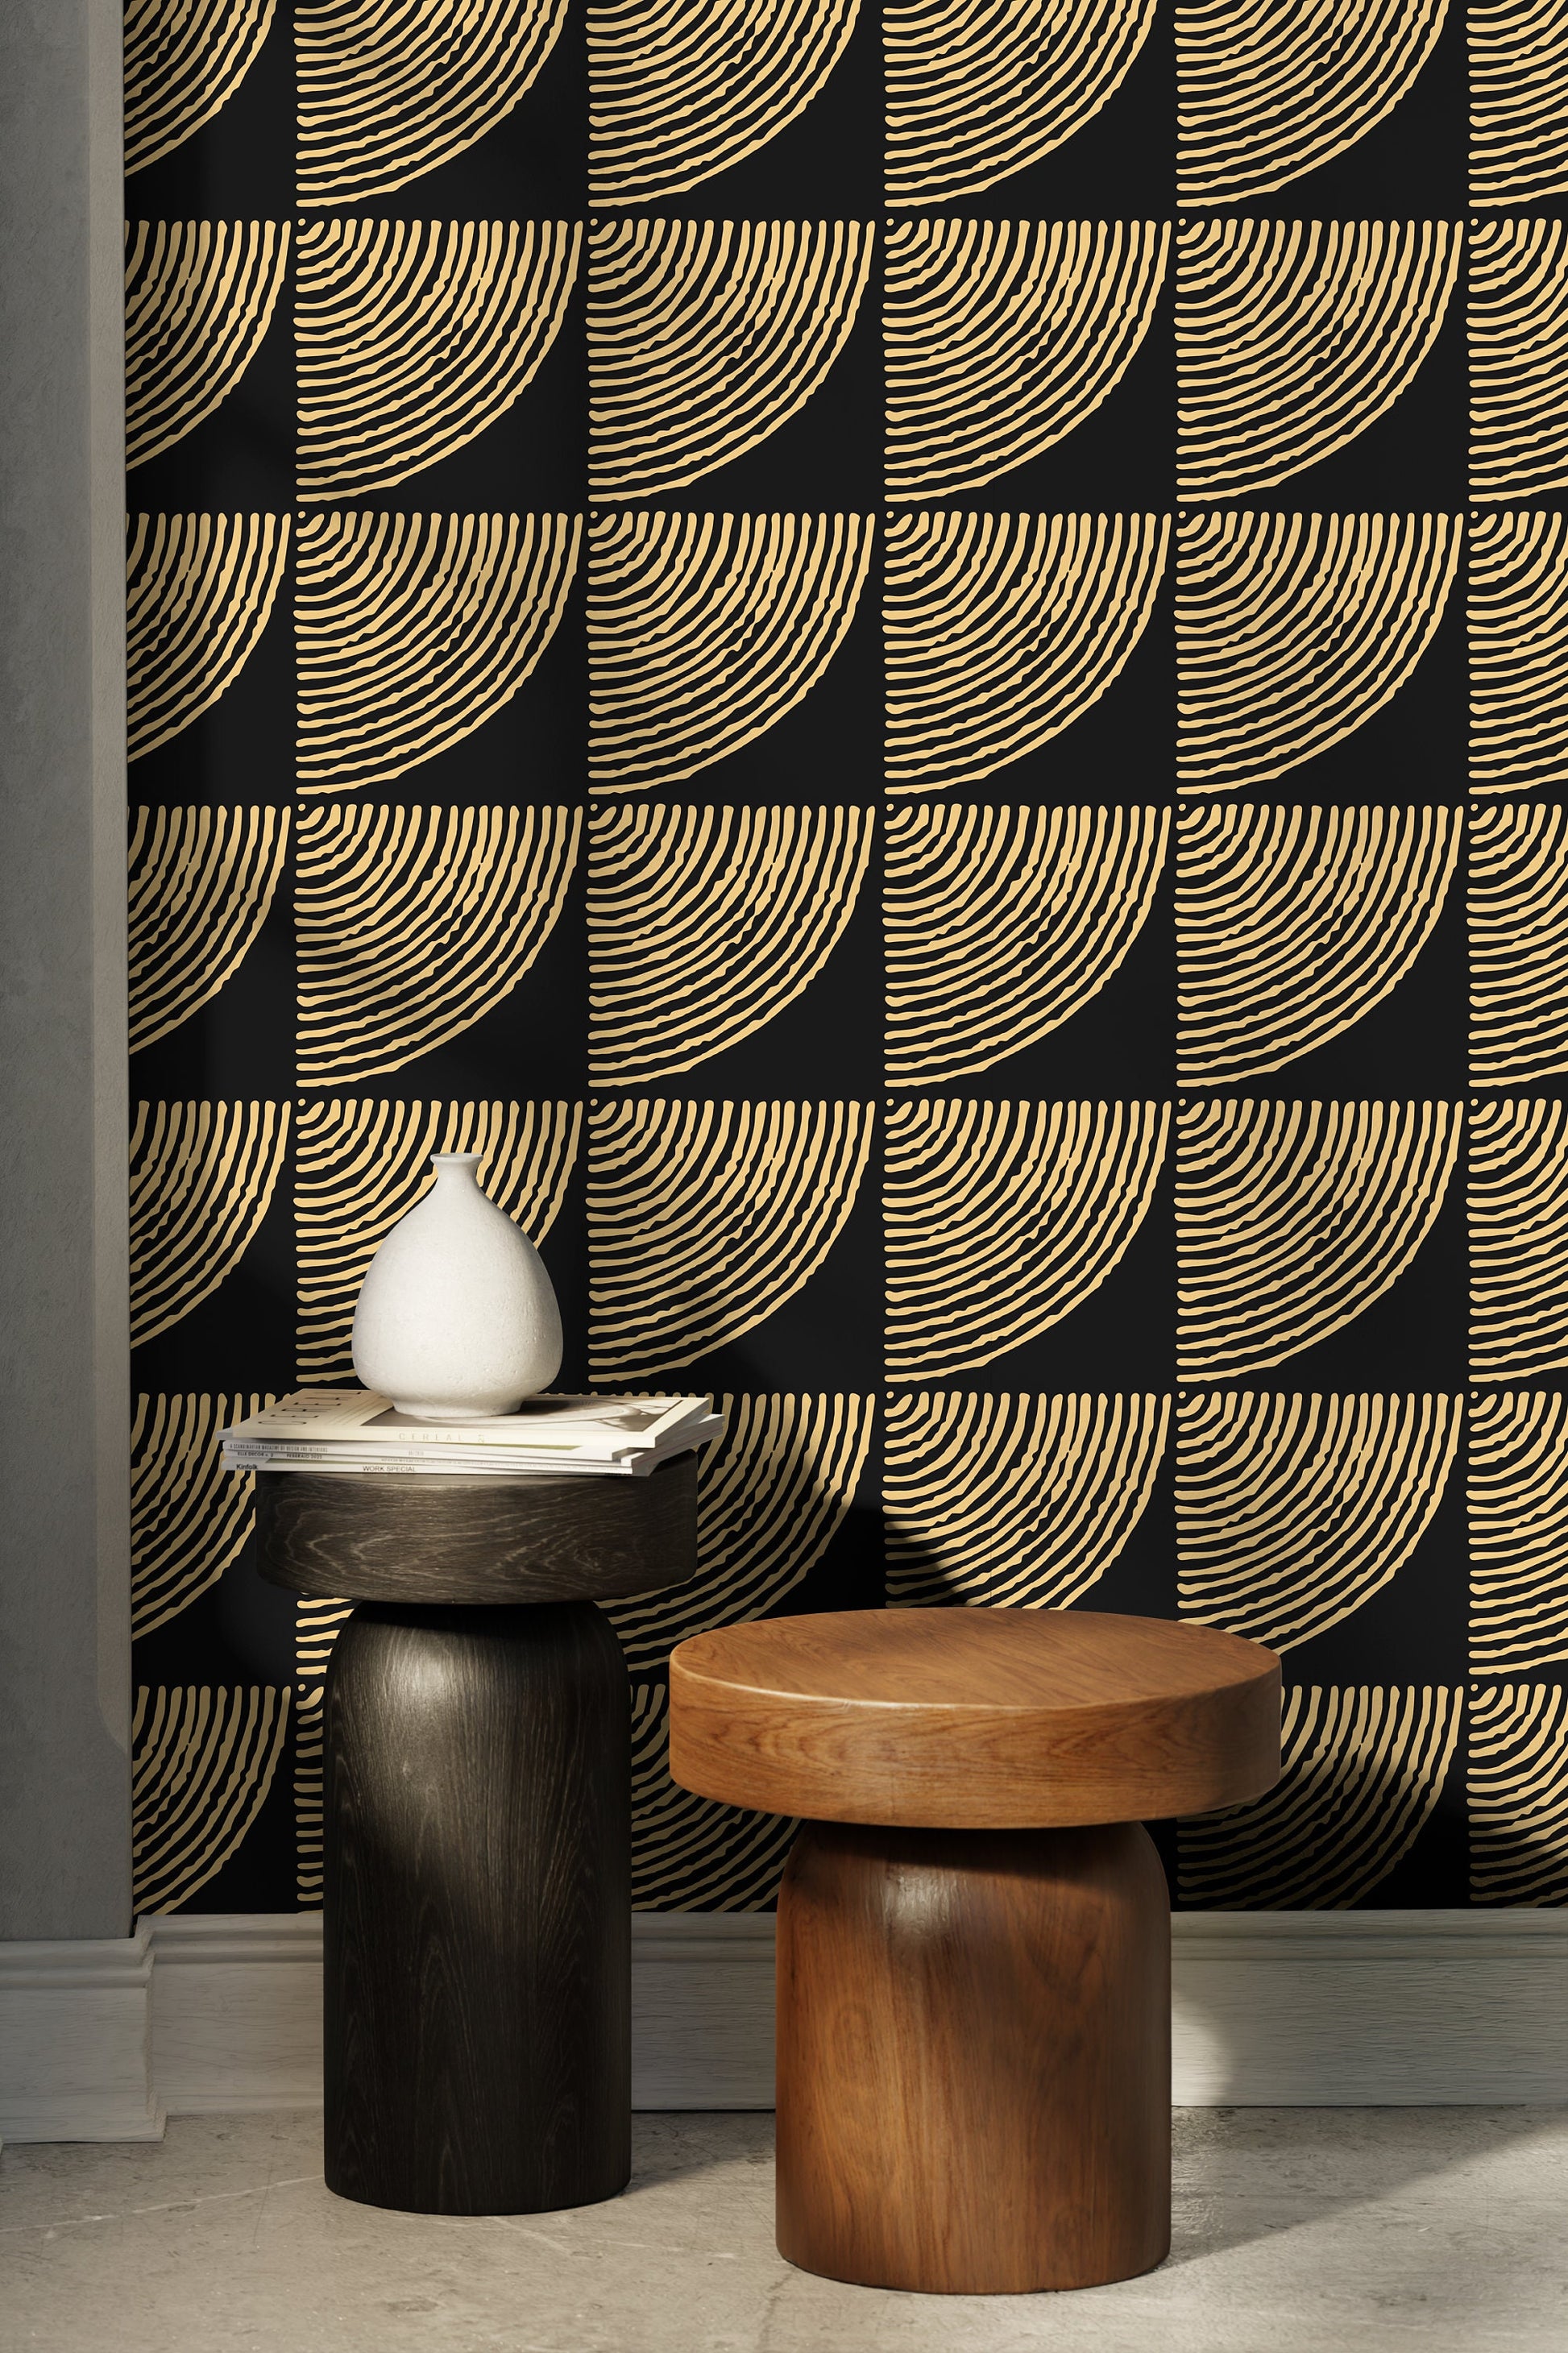 Wallpaper Peel and Stick Wallpaper Removable Wallpaper Home Decor Wall Art Wall Decor Room Decor / Black and Gold Modern Wallpaper - C483